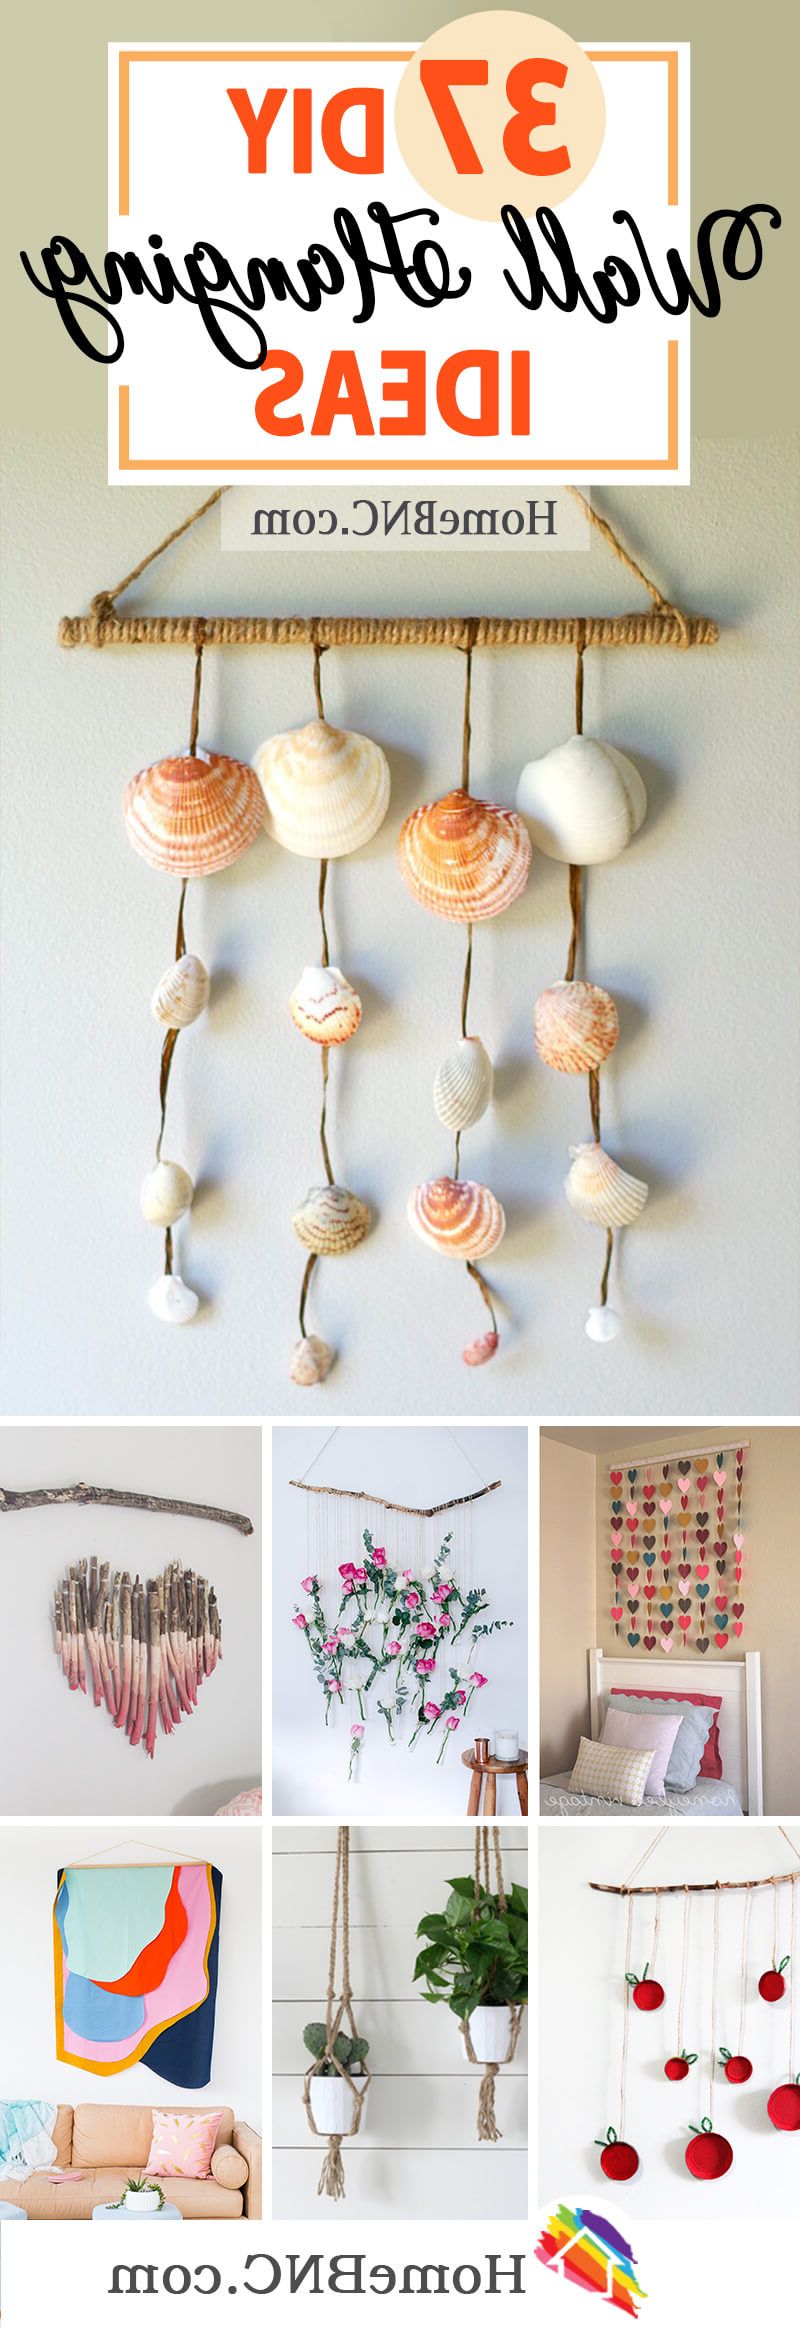 Current 37 Best Diy Wall Hanging Ideas And Designs For 2022 For Wall Hanging Decorations (View 2 of 15)